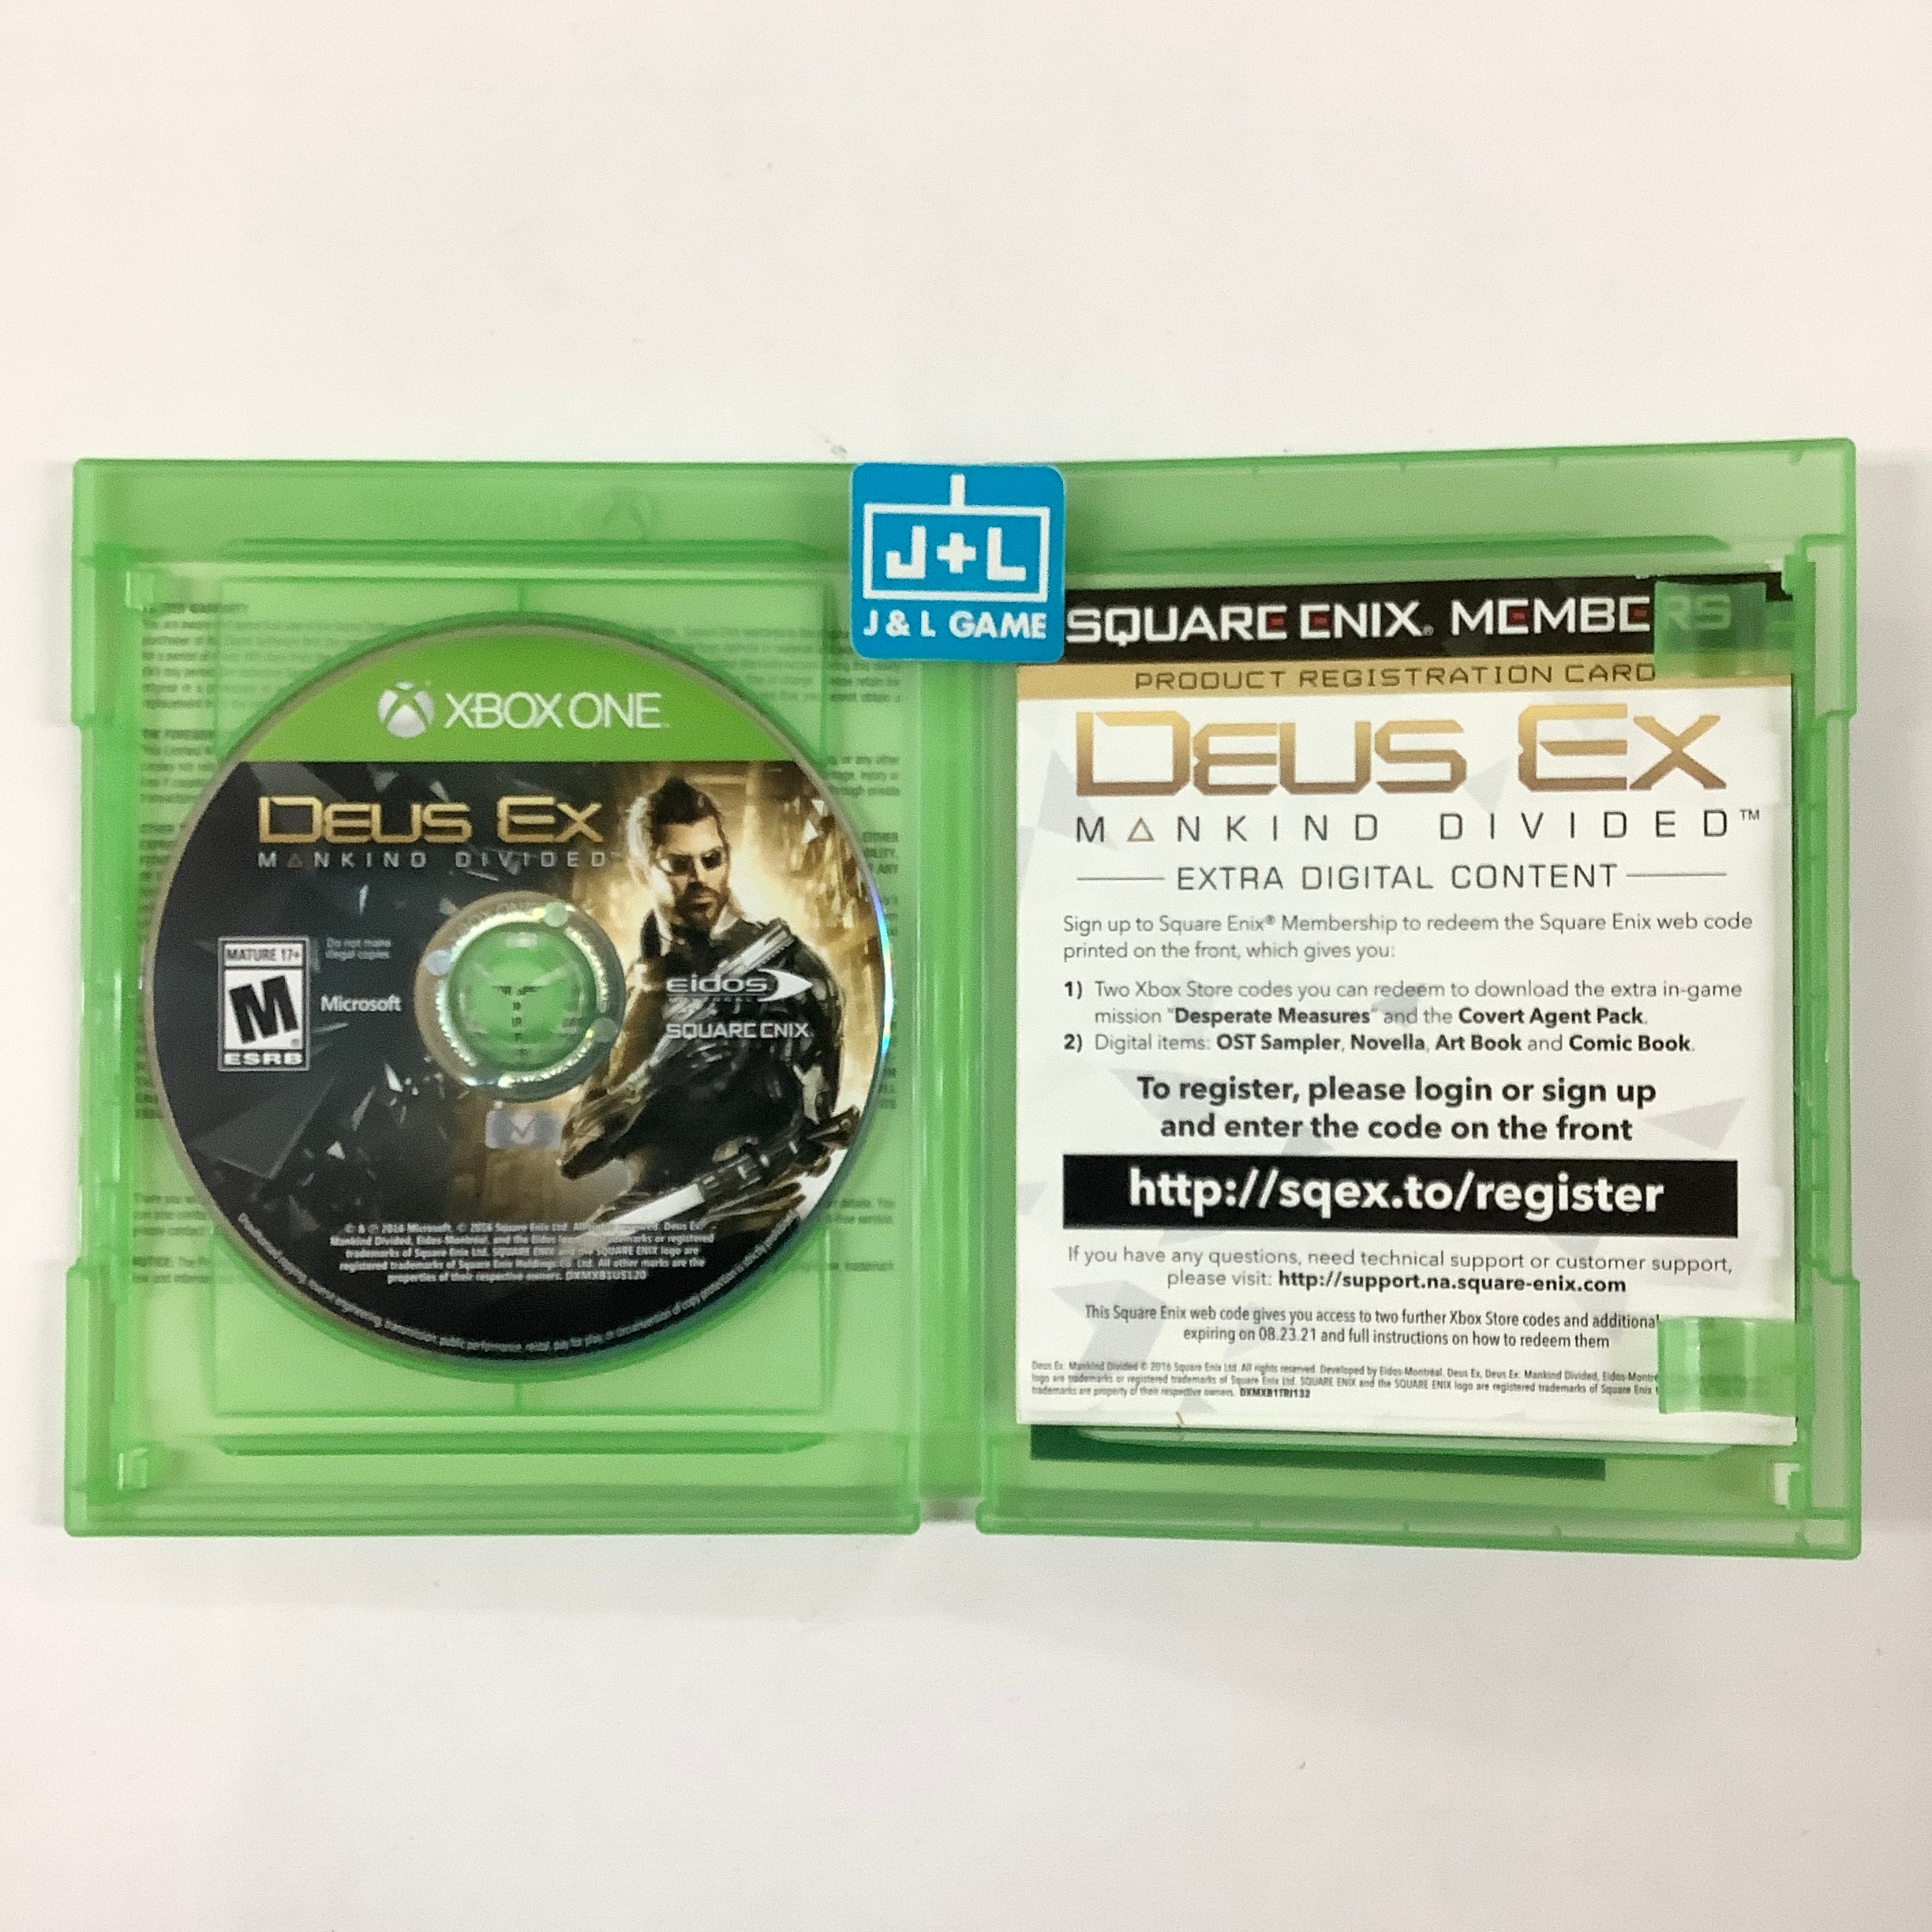 Deus Ex: Mankind Divided (Day One Edition) - (XB1) Xbox One [Pre-Owned] Video Games Square Enix   